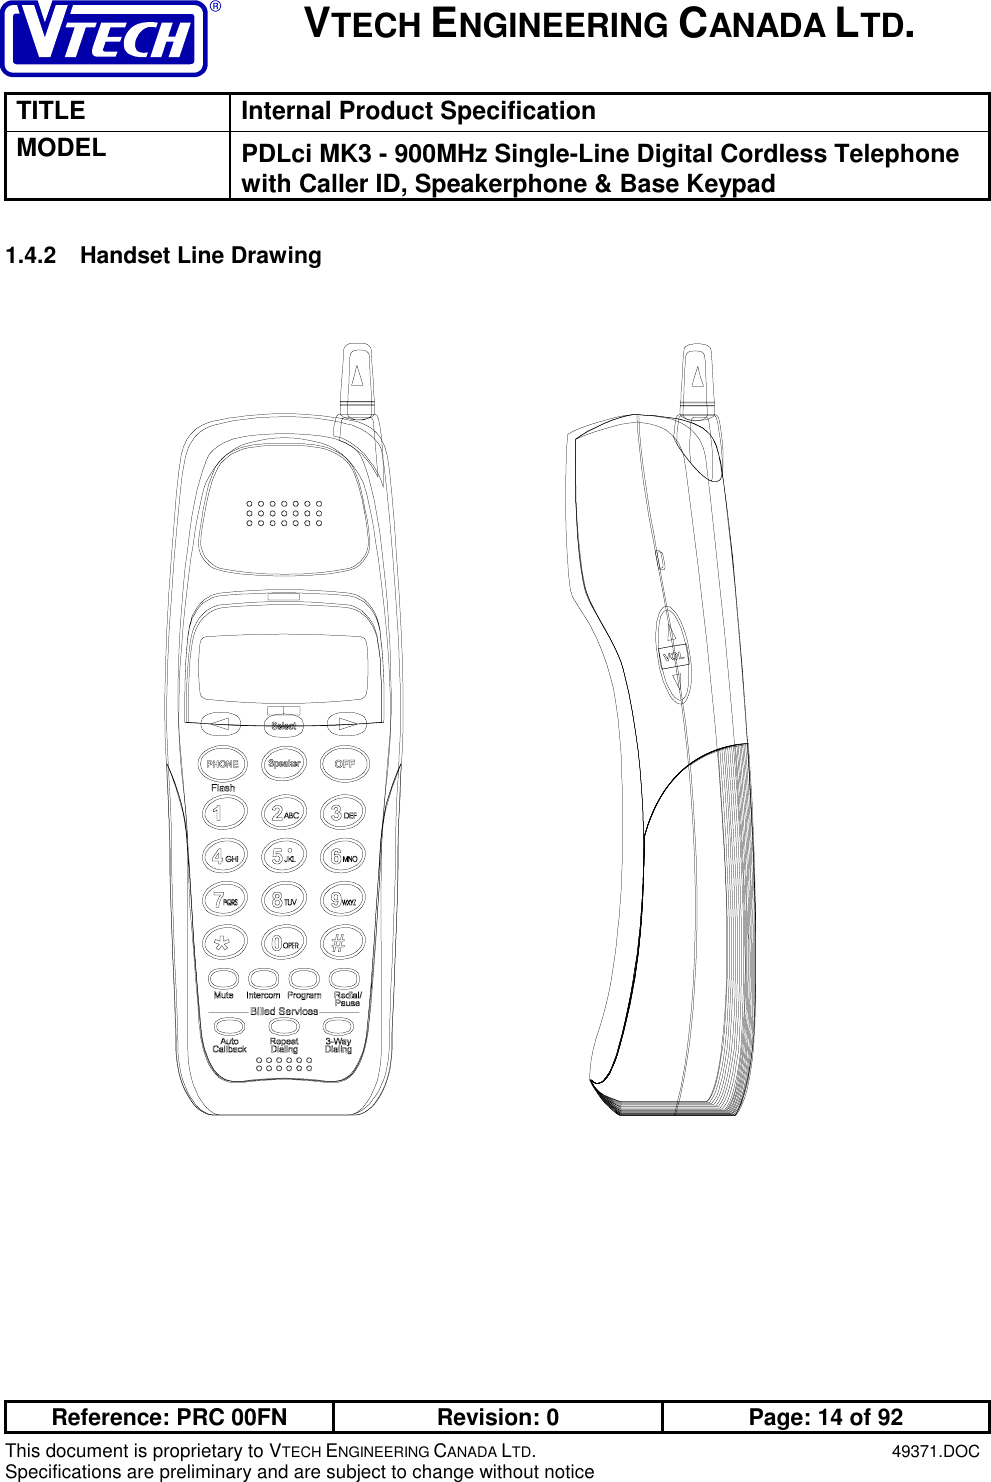 VTECH ENGINEERING CANADA LTD.TITLE Internal Product SpecificationMODEL PDLci MK3 - 900MHz Single-Line Digital Cordless Telephonewith Caller ID, Speakerphone &amp; Base KeypadReference: PRC 00FN Revision: 0 Page: 14 of 92This document is proprietary to VTECH ENGINEERING CANADA LTD.49371.DOCSpecifications are preliminary and are subject to change without notice1.4.2  Handset Line Drawing